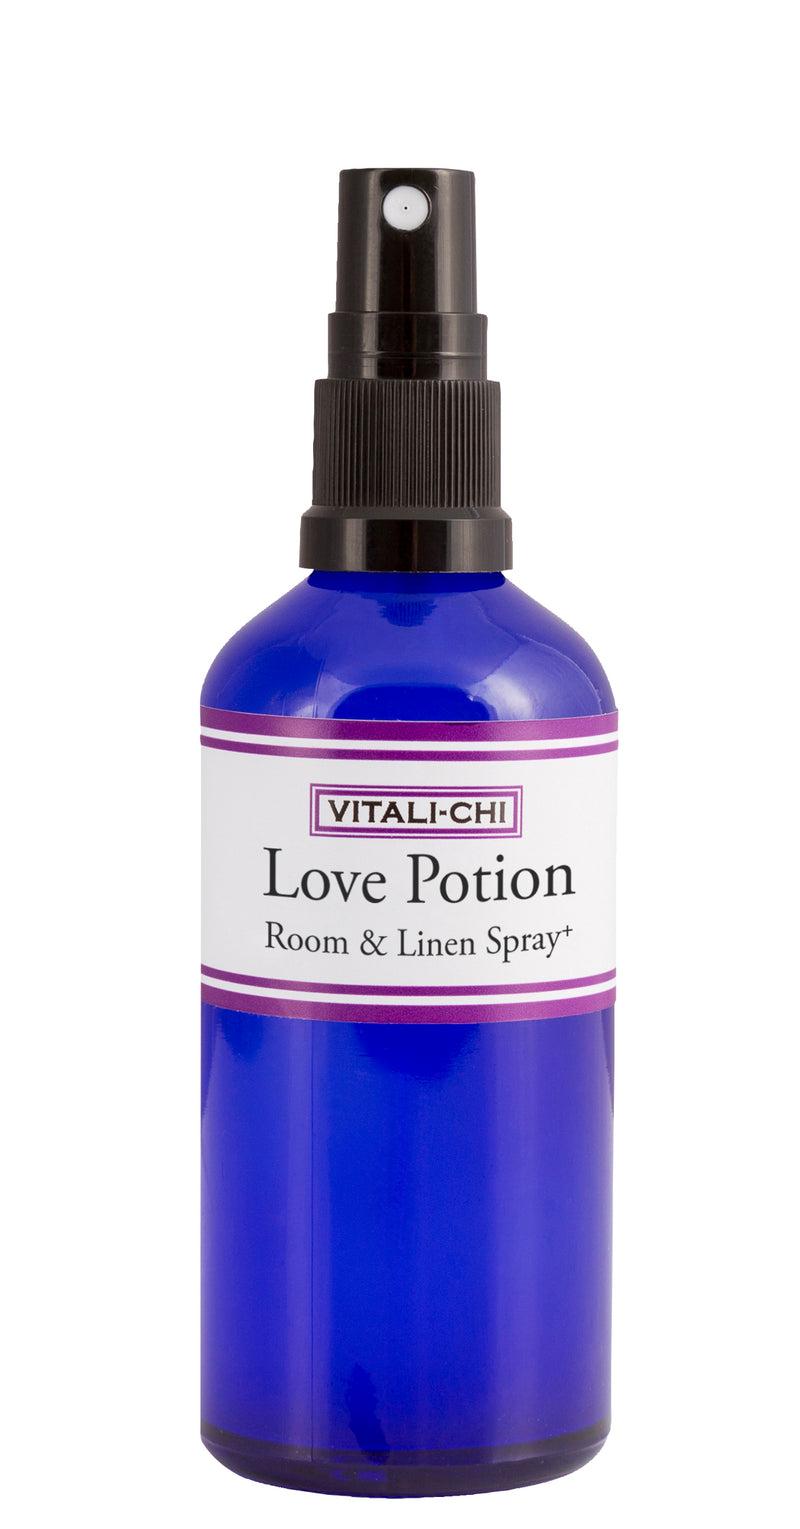 Valentine's Special! Love Potion Sensuous Body Lotion AND Room Spray AND Love Potion AromaFrequencies+ 250ml + 100ml + 10ml (save £15.50)